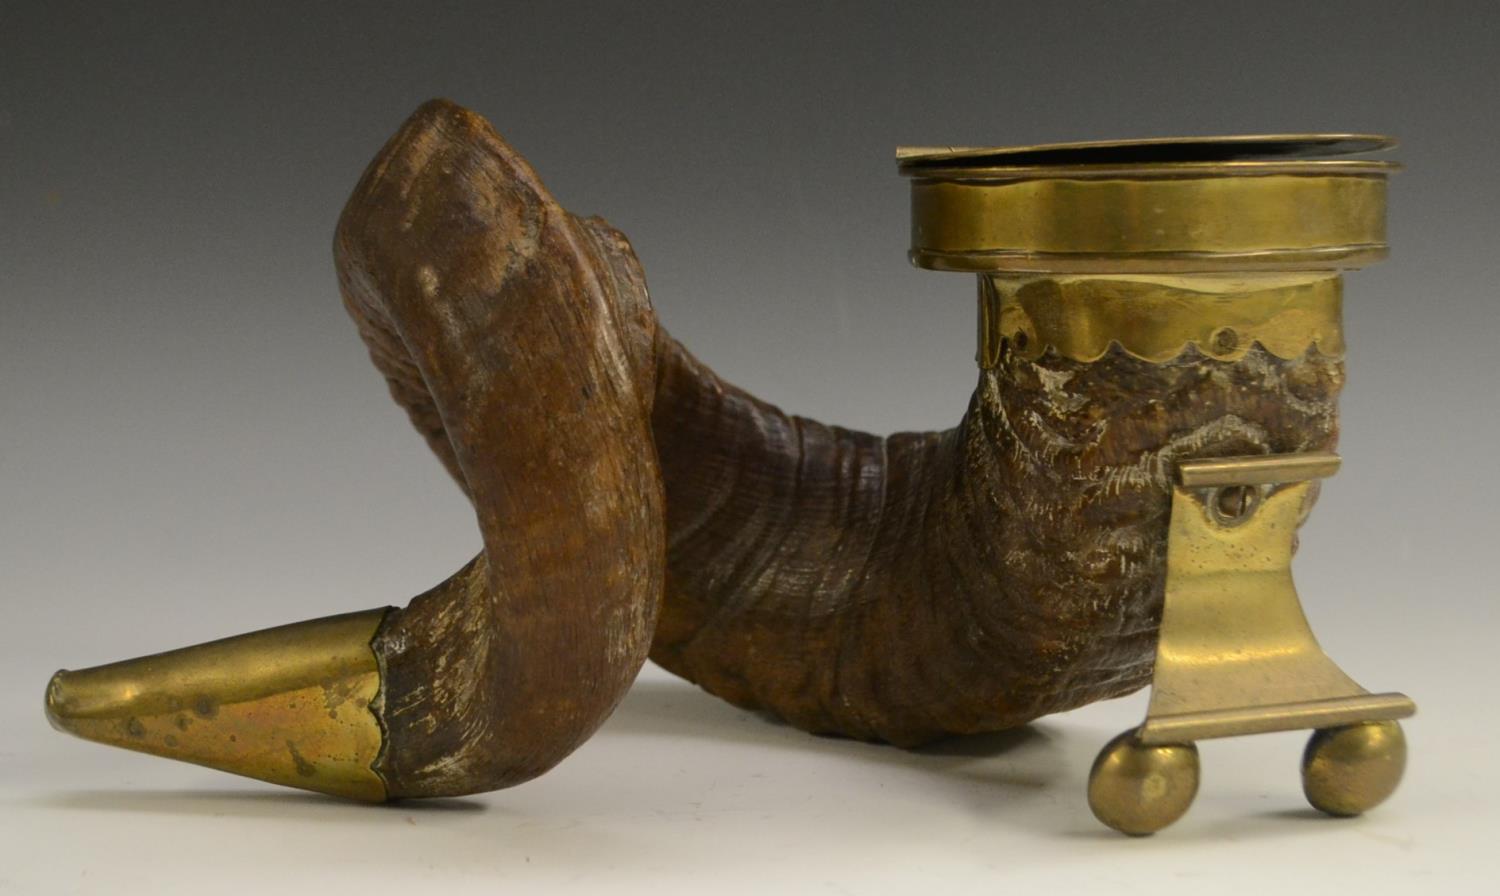 A 19th century Scottish ram's horn table snuff mull, hinged cover, 26cm wide, c.